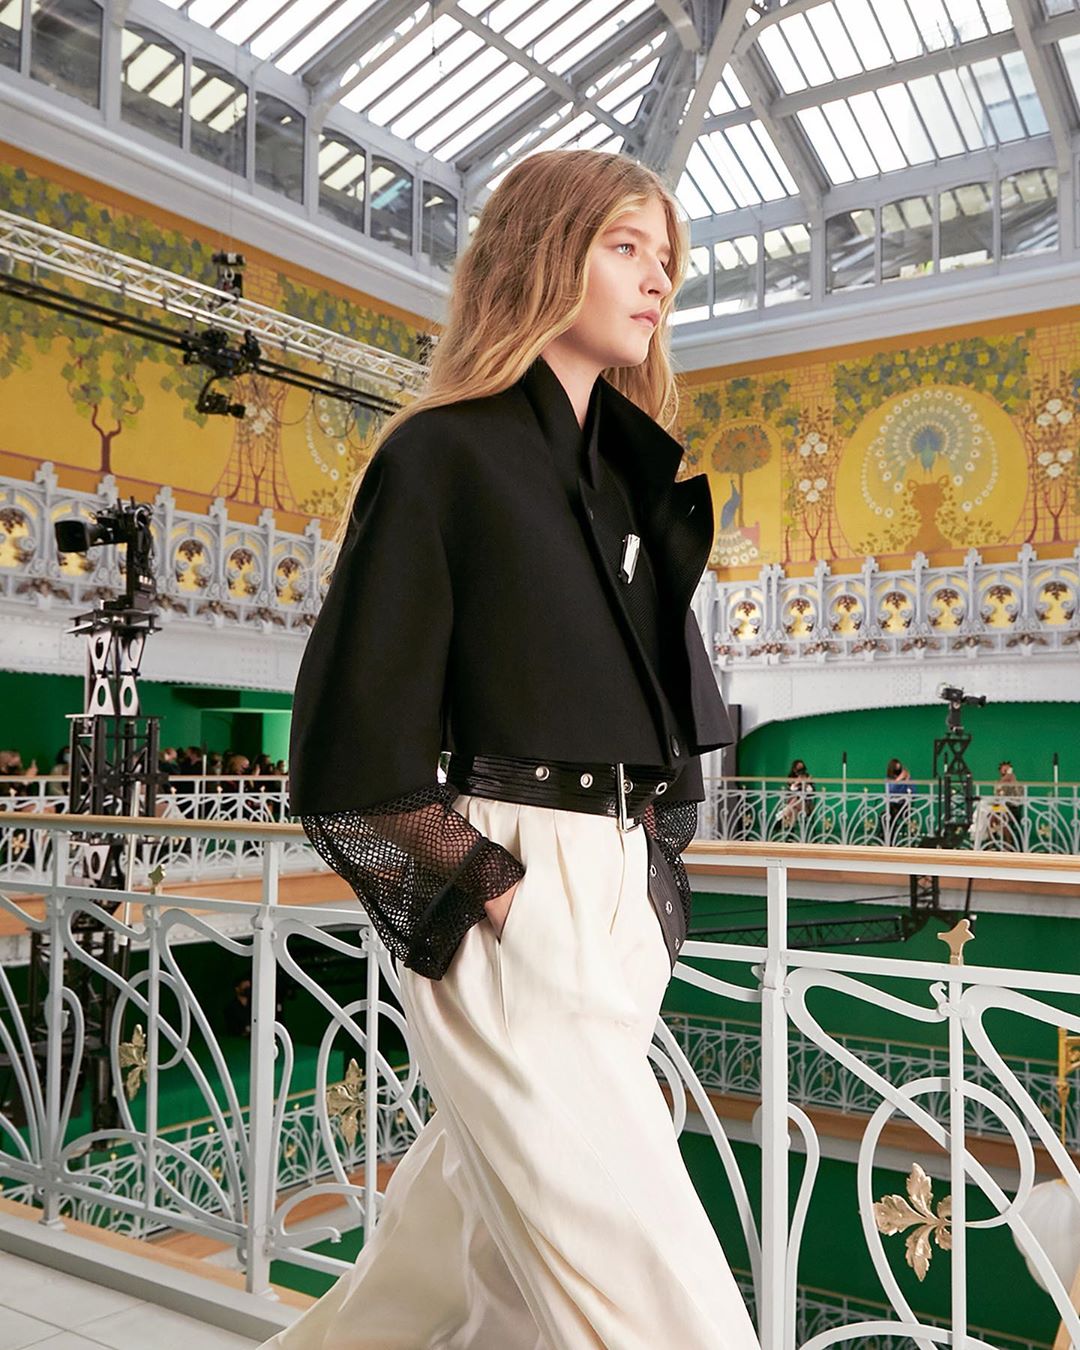 Louis Vuitton - #LVSS21
Reconsidering neutrality. A selection of looks from @NicolasGhesquiere’s latest #LouisVuitton Collection. See more from the Fashion Show at louisvuitton.com​